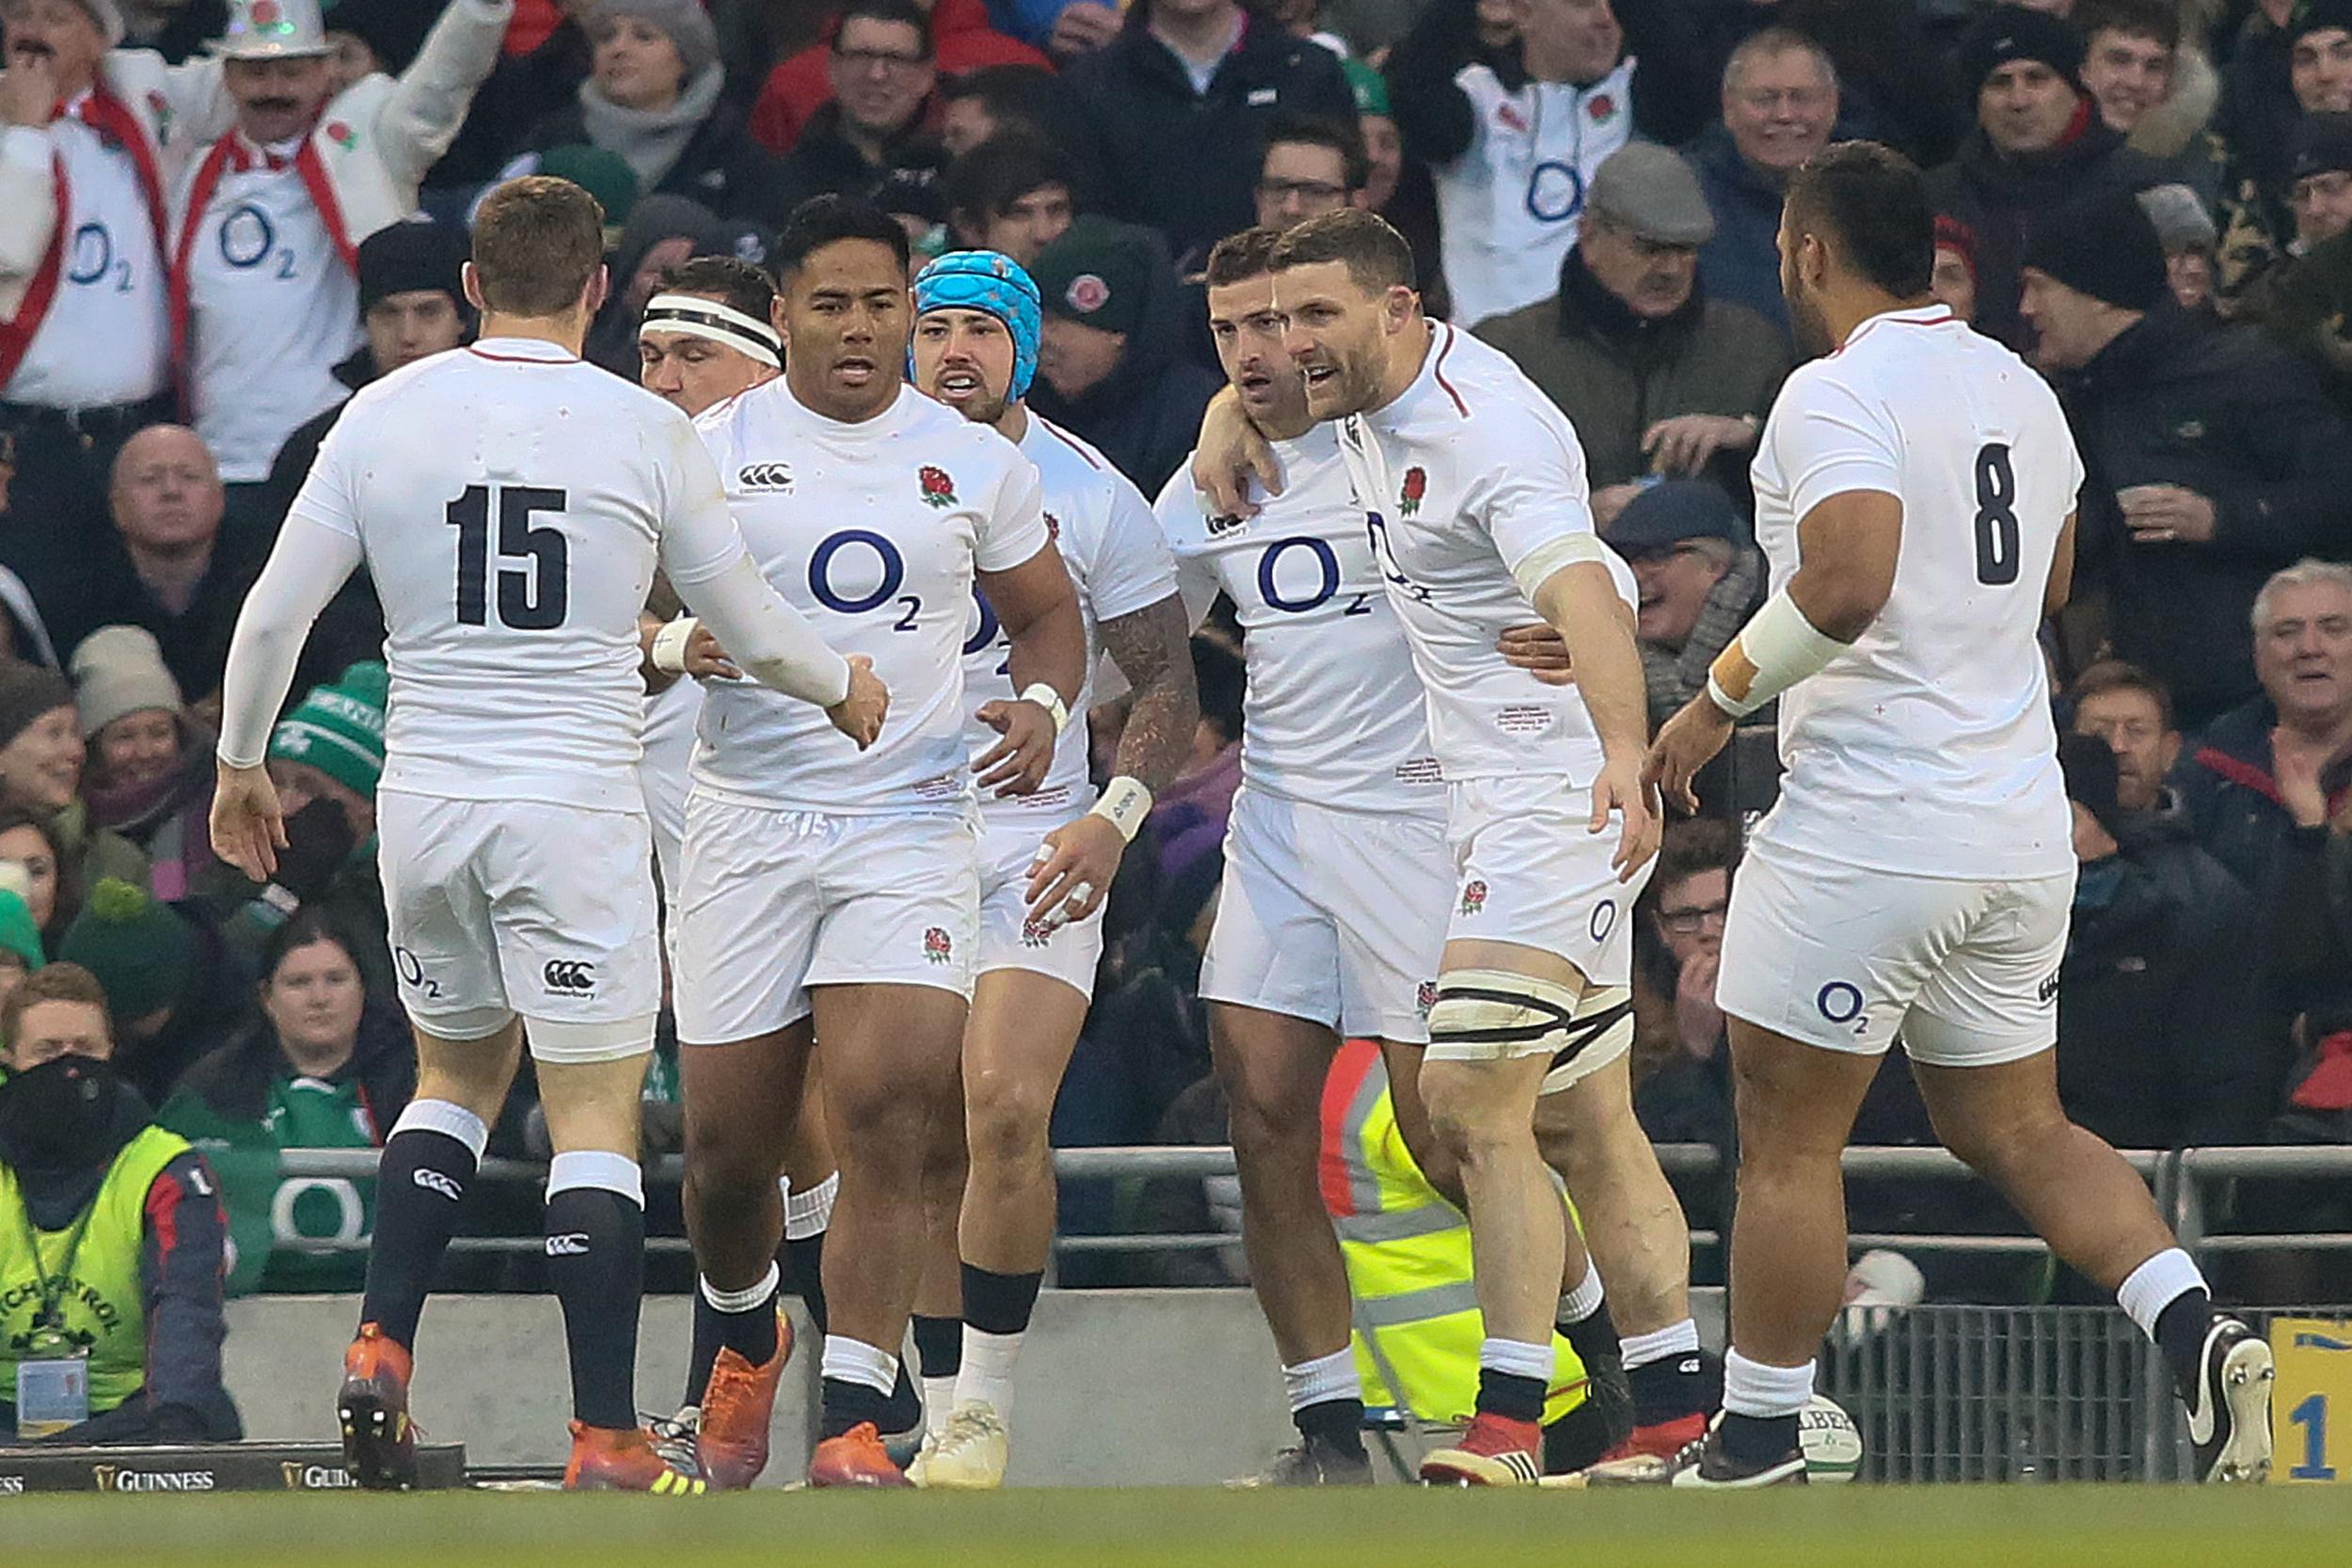 Stream England v Ireland Rugby at the Six Nations Championship: Watch Online For Free